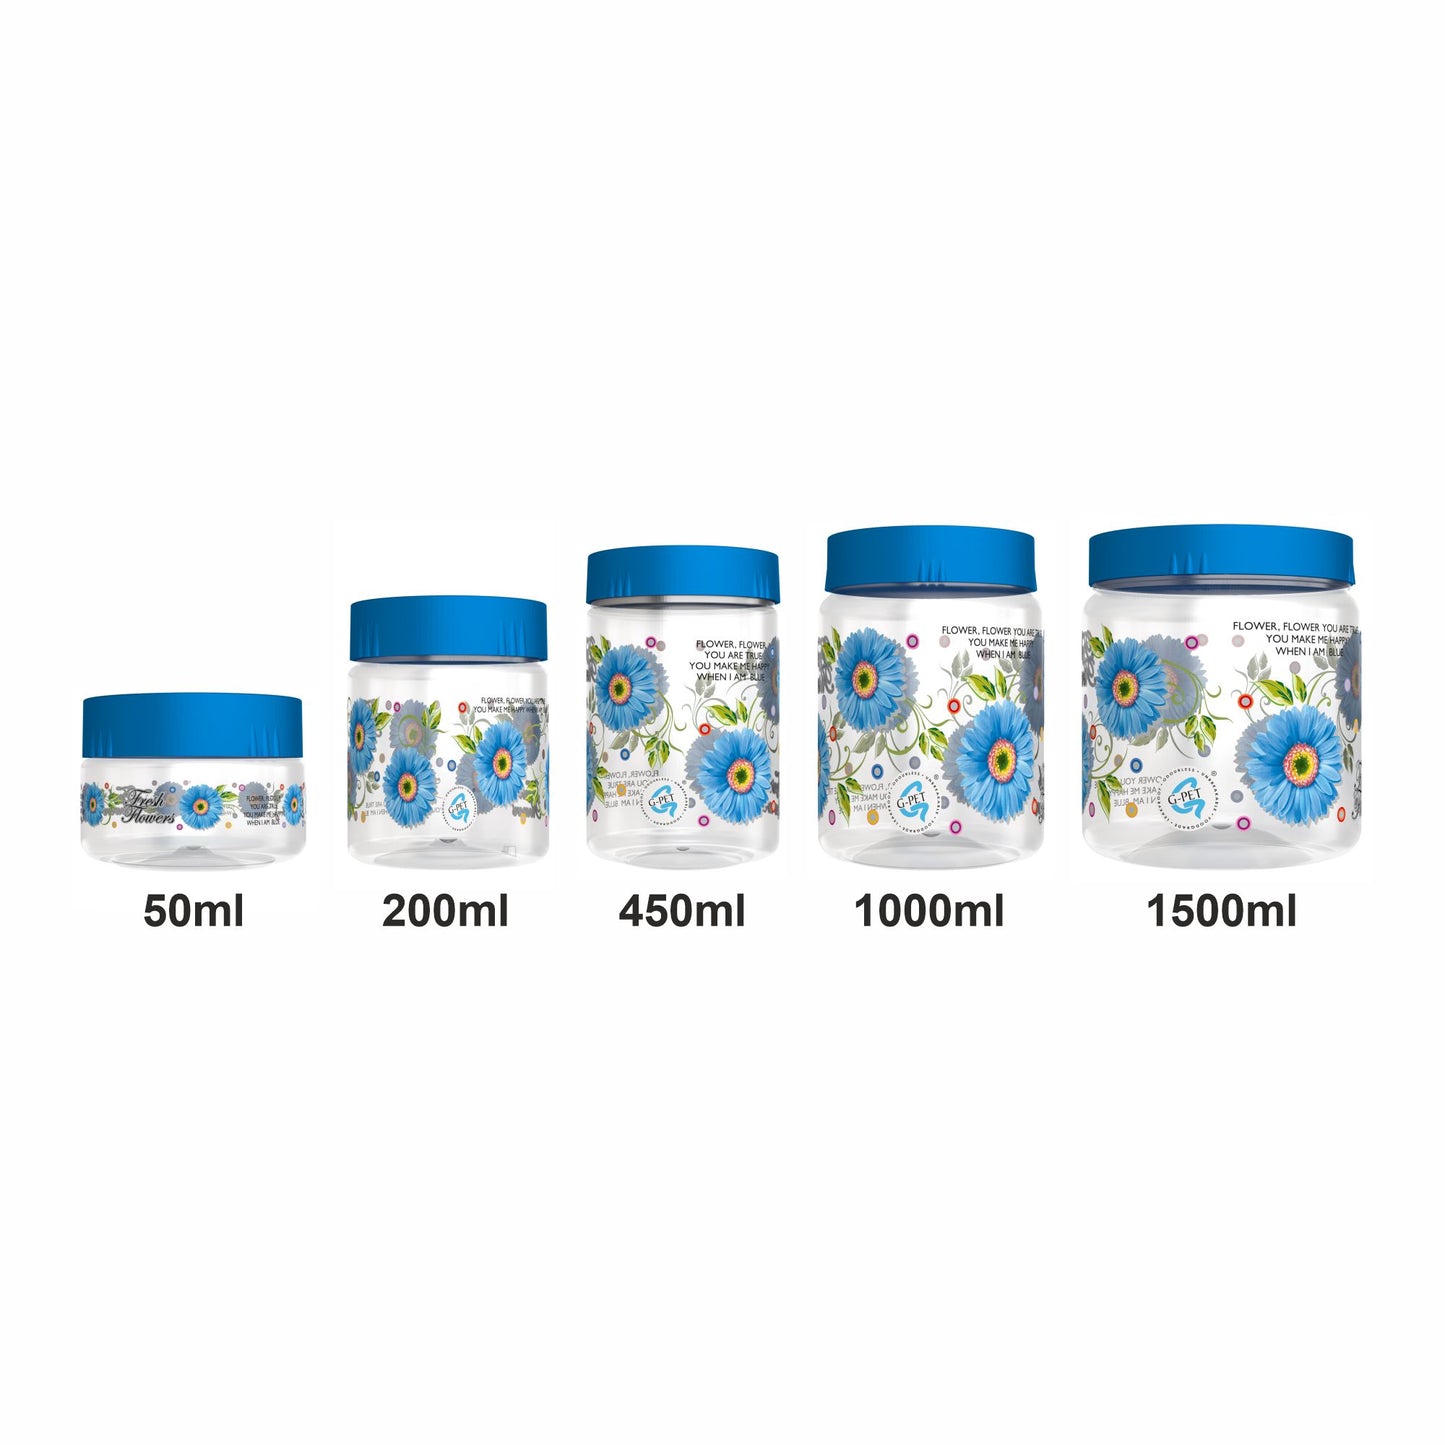 Print Magic Container Blue Pack of 18 - 1500ml (3 pcs), 1000ml (3 pcs), 450ml (3 pcs) 200ml (3 pcs), 50ml (6 pcs)